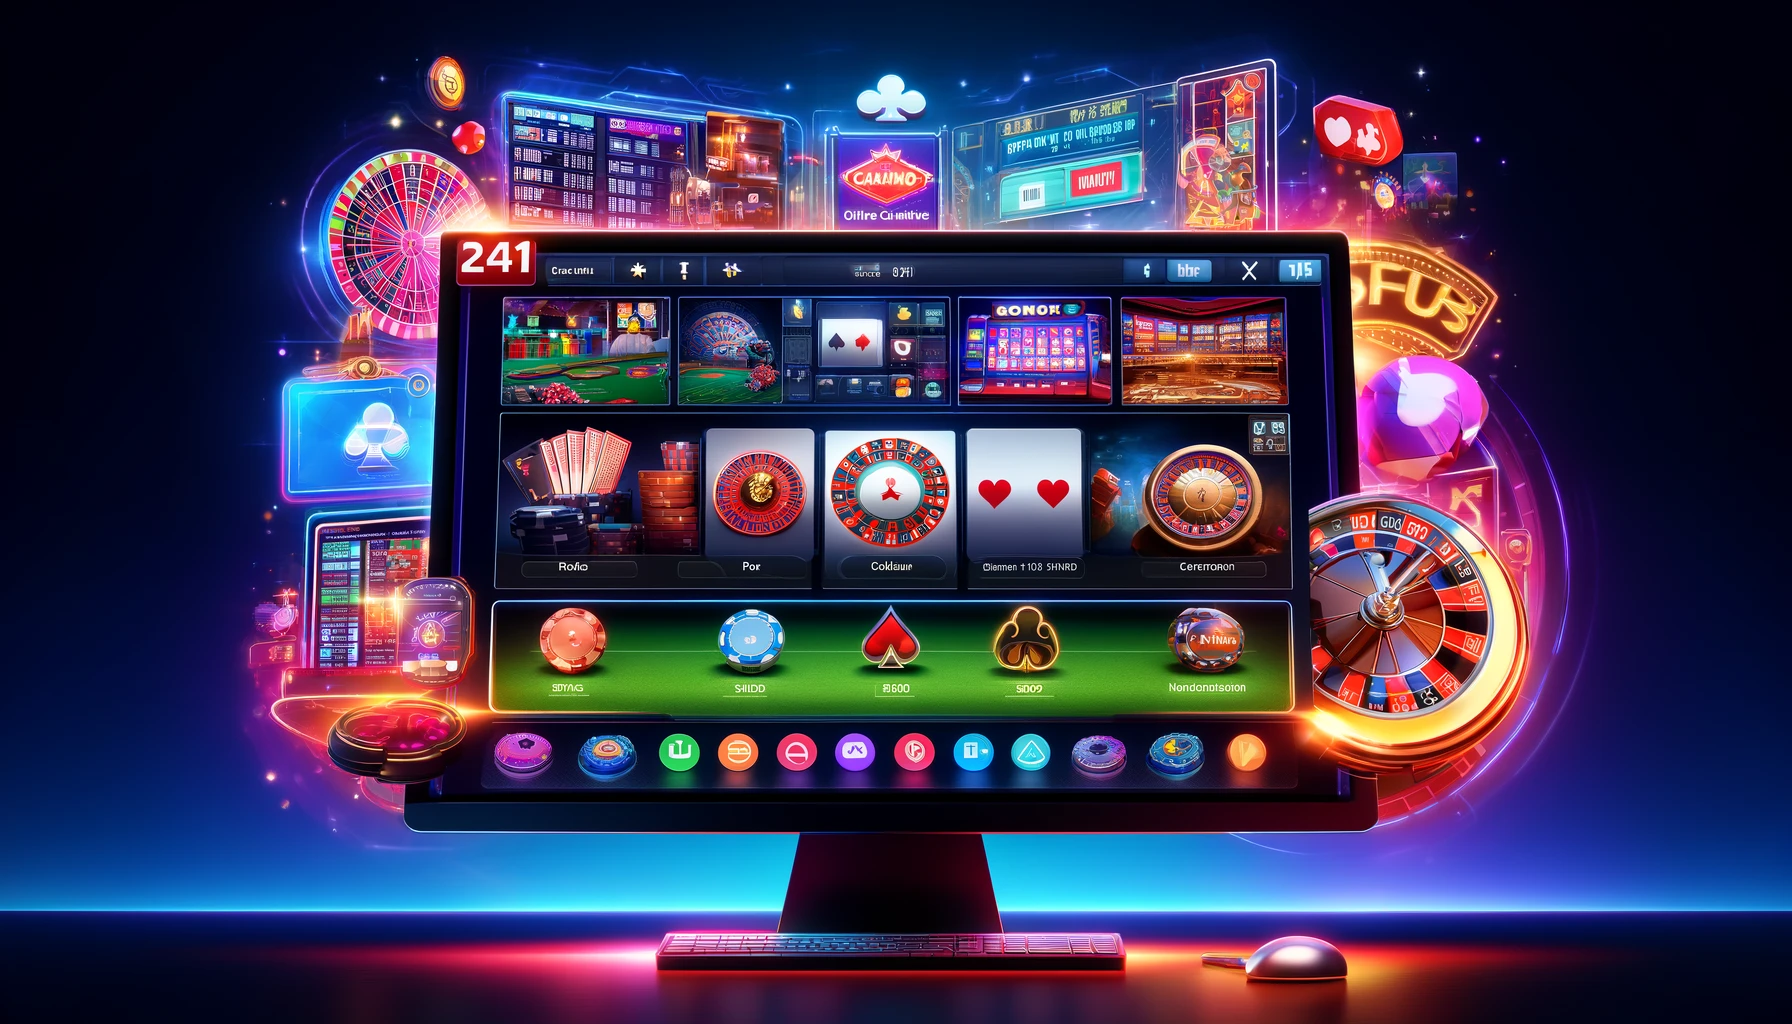 A vibrant and detailed illustration of an online casino interface on a widescreen monitor, featuring various casino games like poker, blackjack, roulette, and slots.